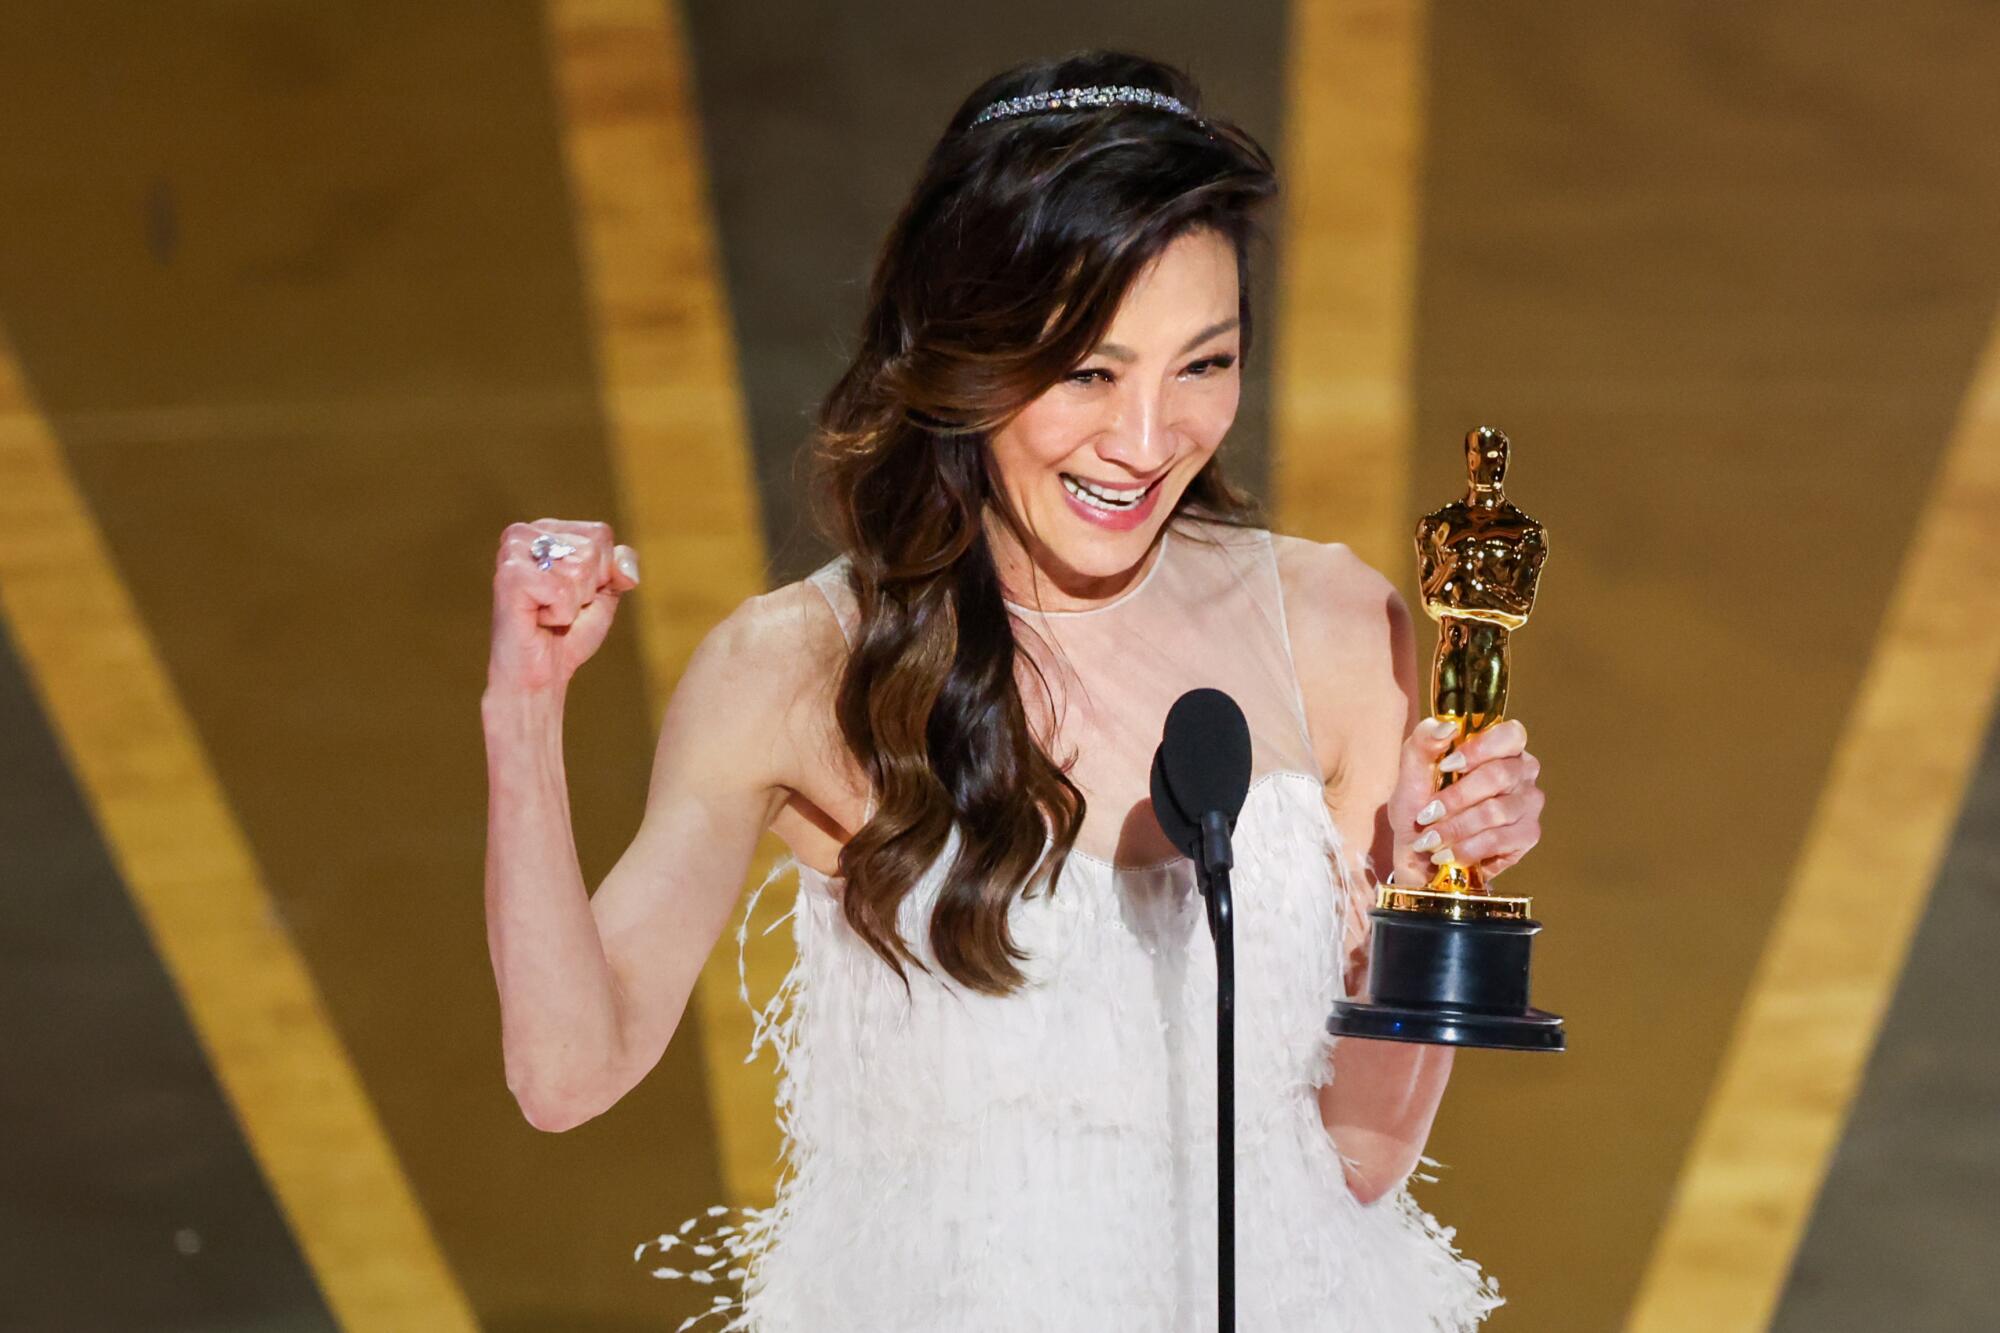 A woman in a white dress with long dark-brown hair, smiles and gestures as she accepts an award